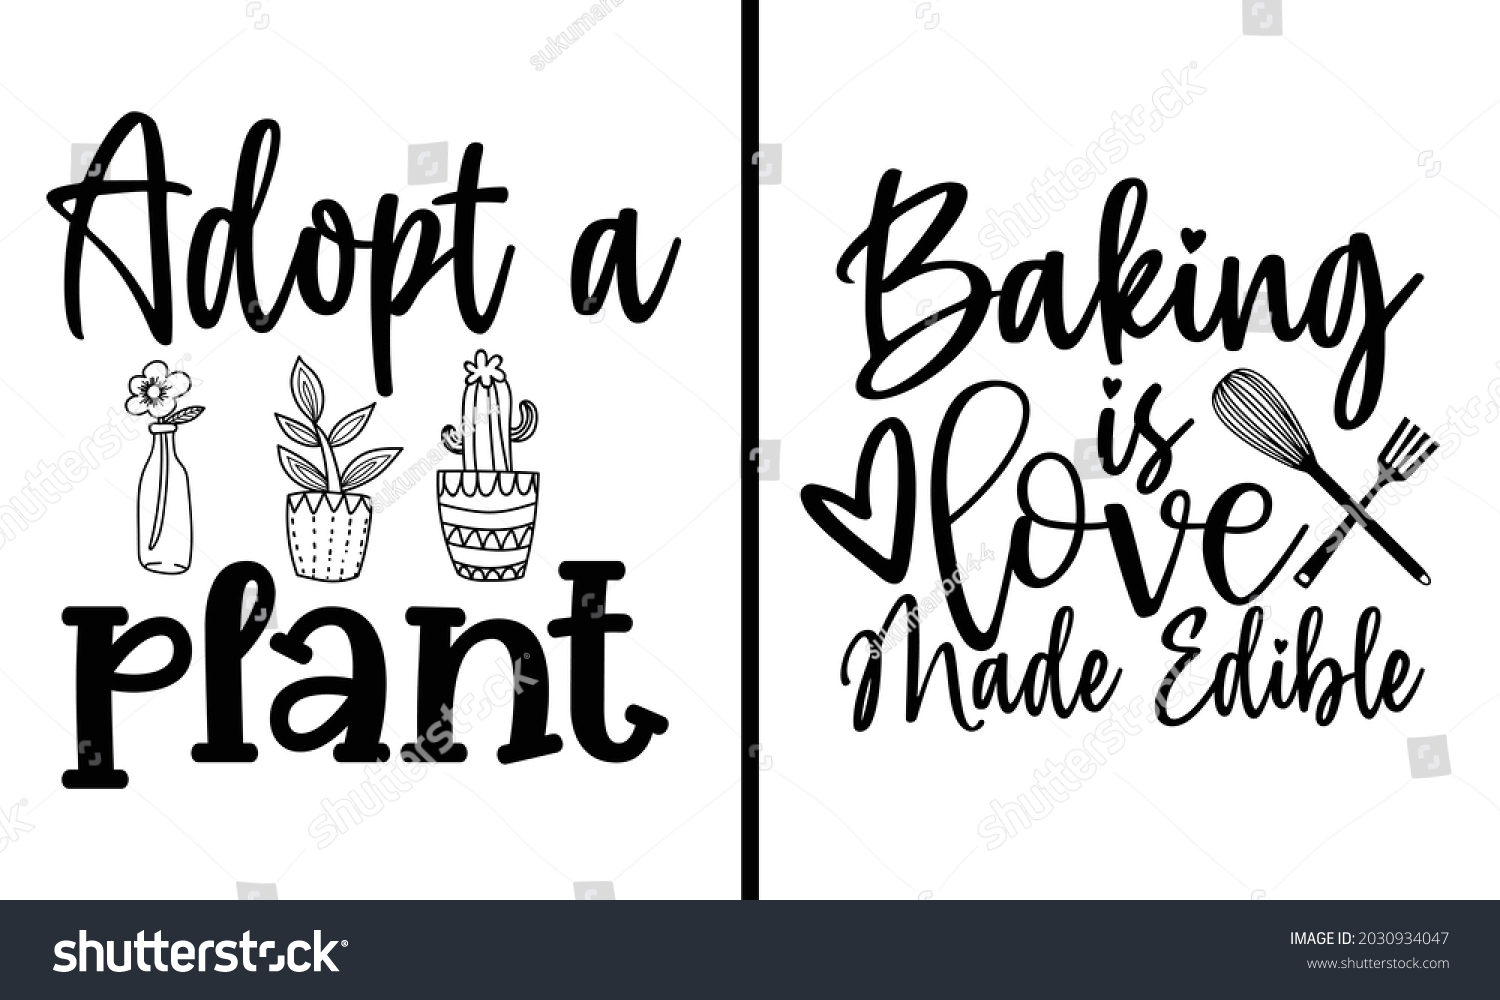 SVG of Baking is love made edible 2 Design Bundle - Food drink t shirt design, Hand drawn lettering phrase, Calligraphy t shirt design, svg Files for Cutting Cricut and Silhouette, card, flyer svg